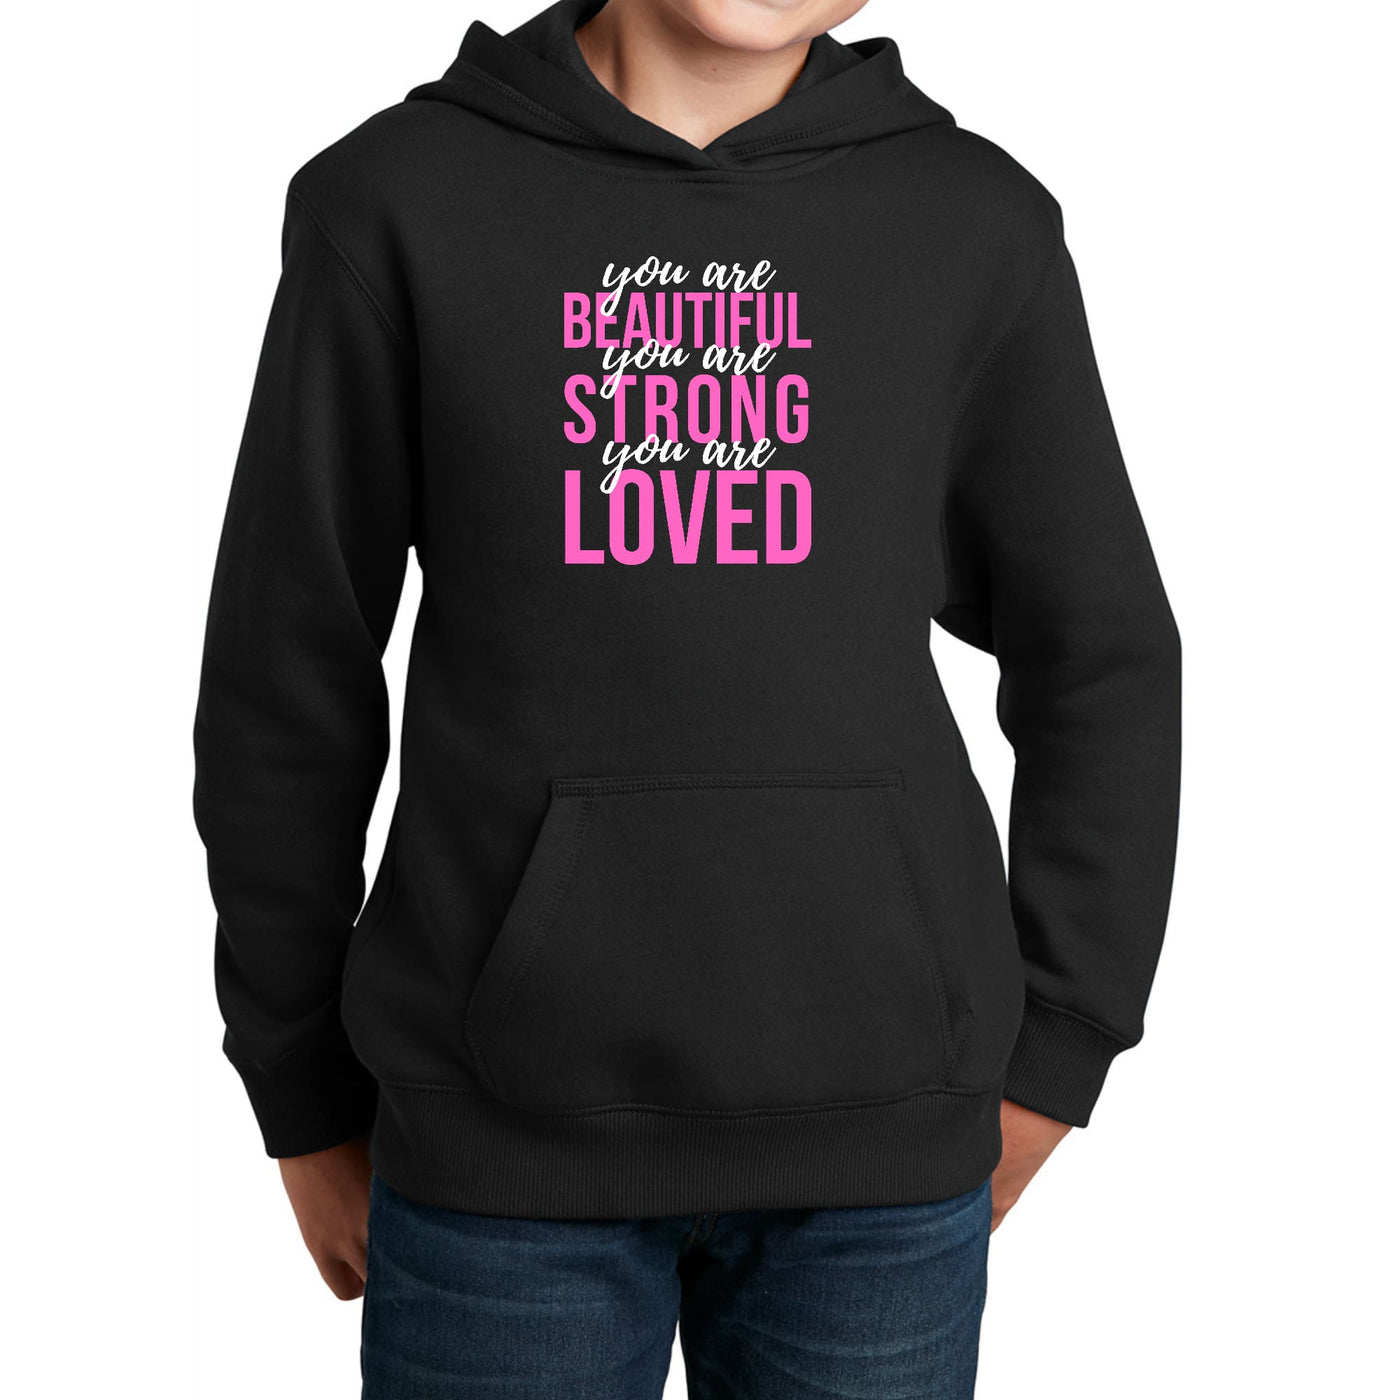 Youth Long Sleeve Hoodie You Are Beautiful Strong Loved Inspiration - Girls